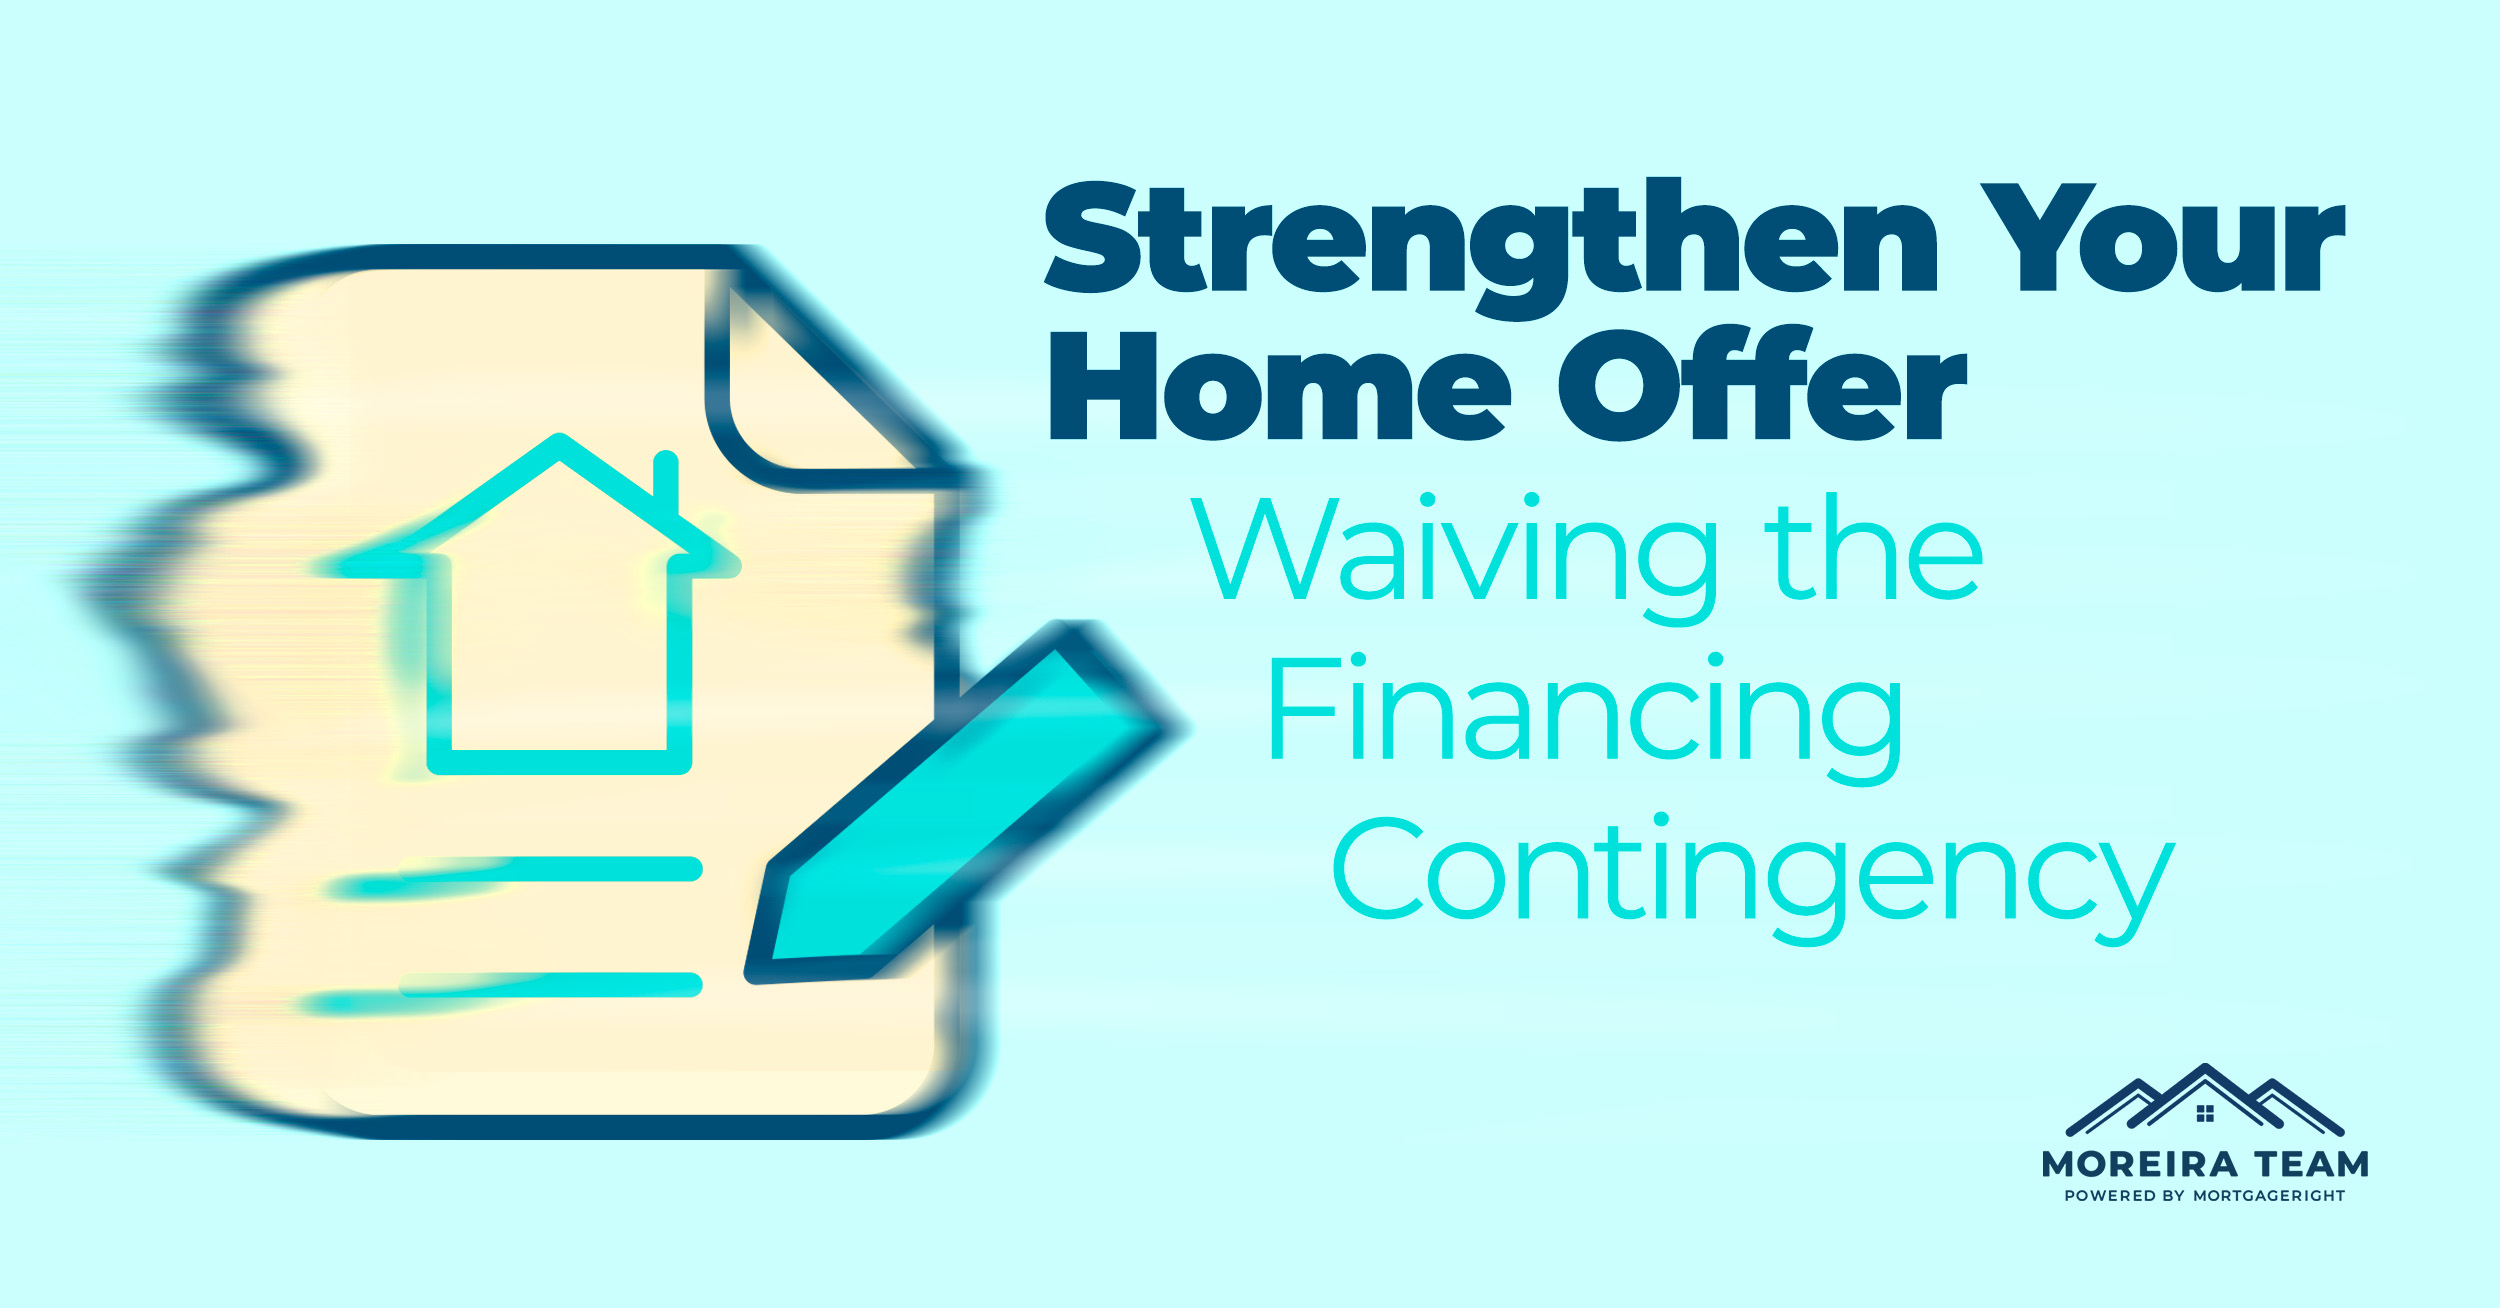 Strengthen Your Home Offer By Waiving Financing Contingency